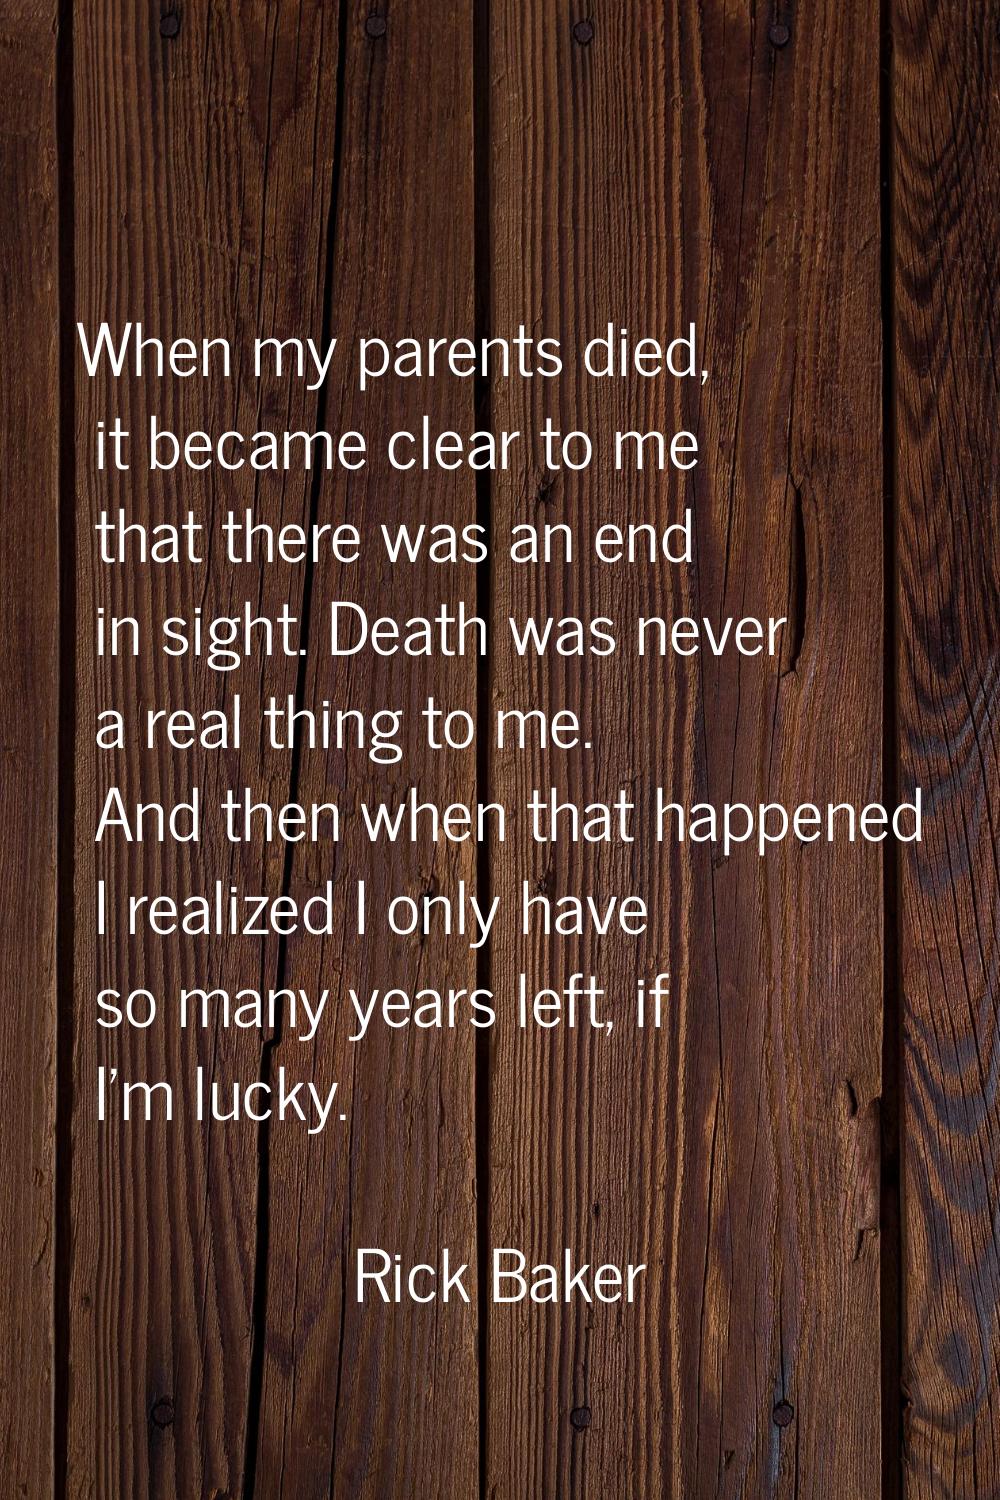 When my parents died, it became clear to me that there was an end in sight. Death was never a real 